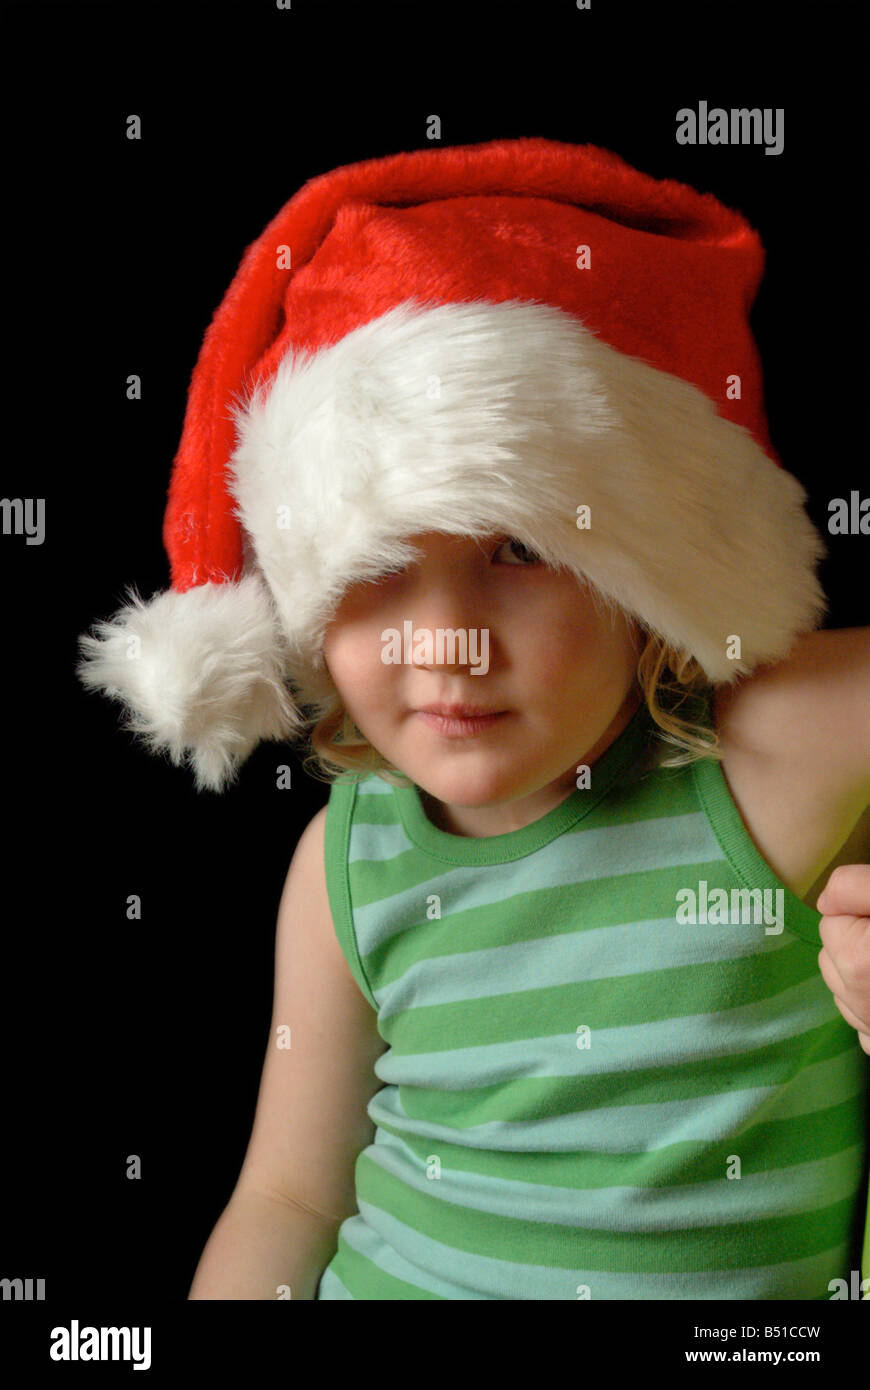 White girl wearing a red christmas hat and green stripy vest, looking apprehensive. Stock Photo